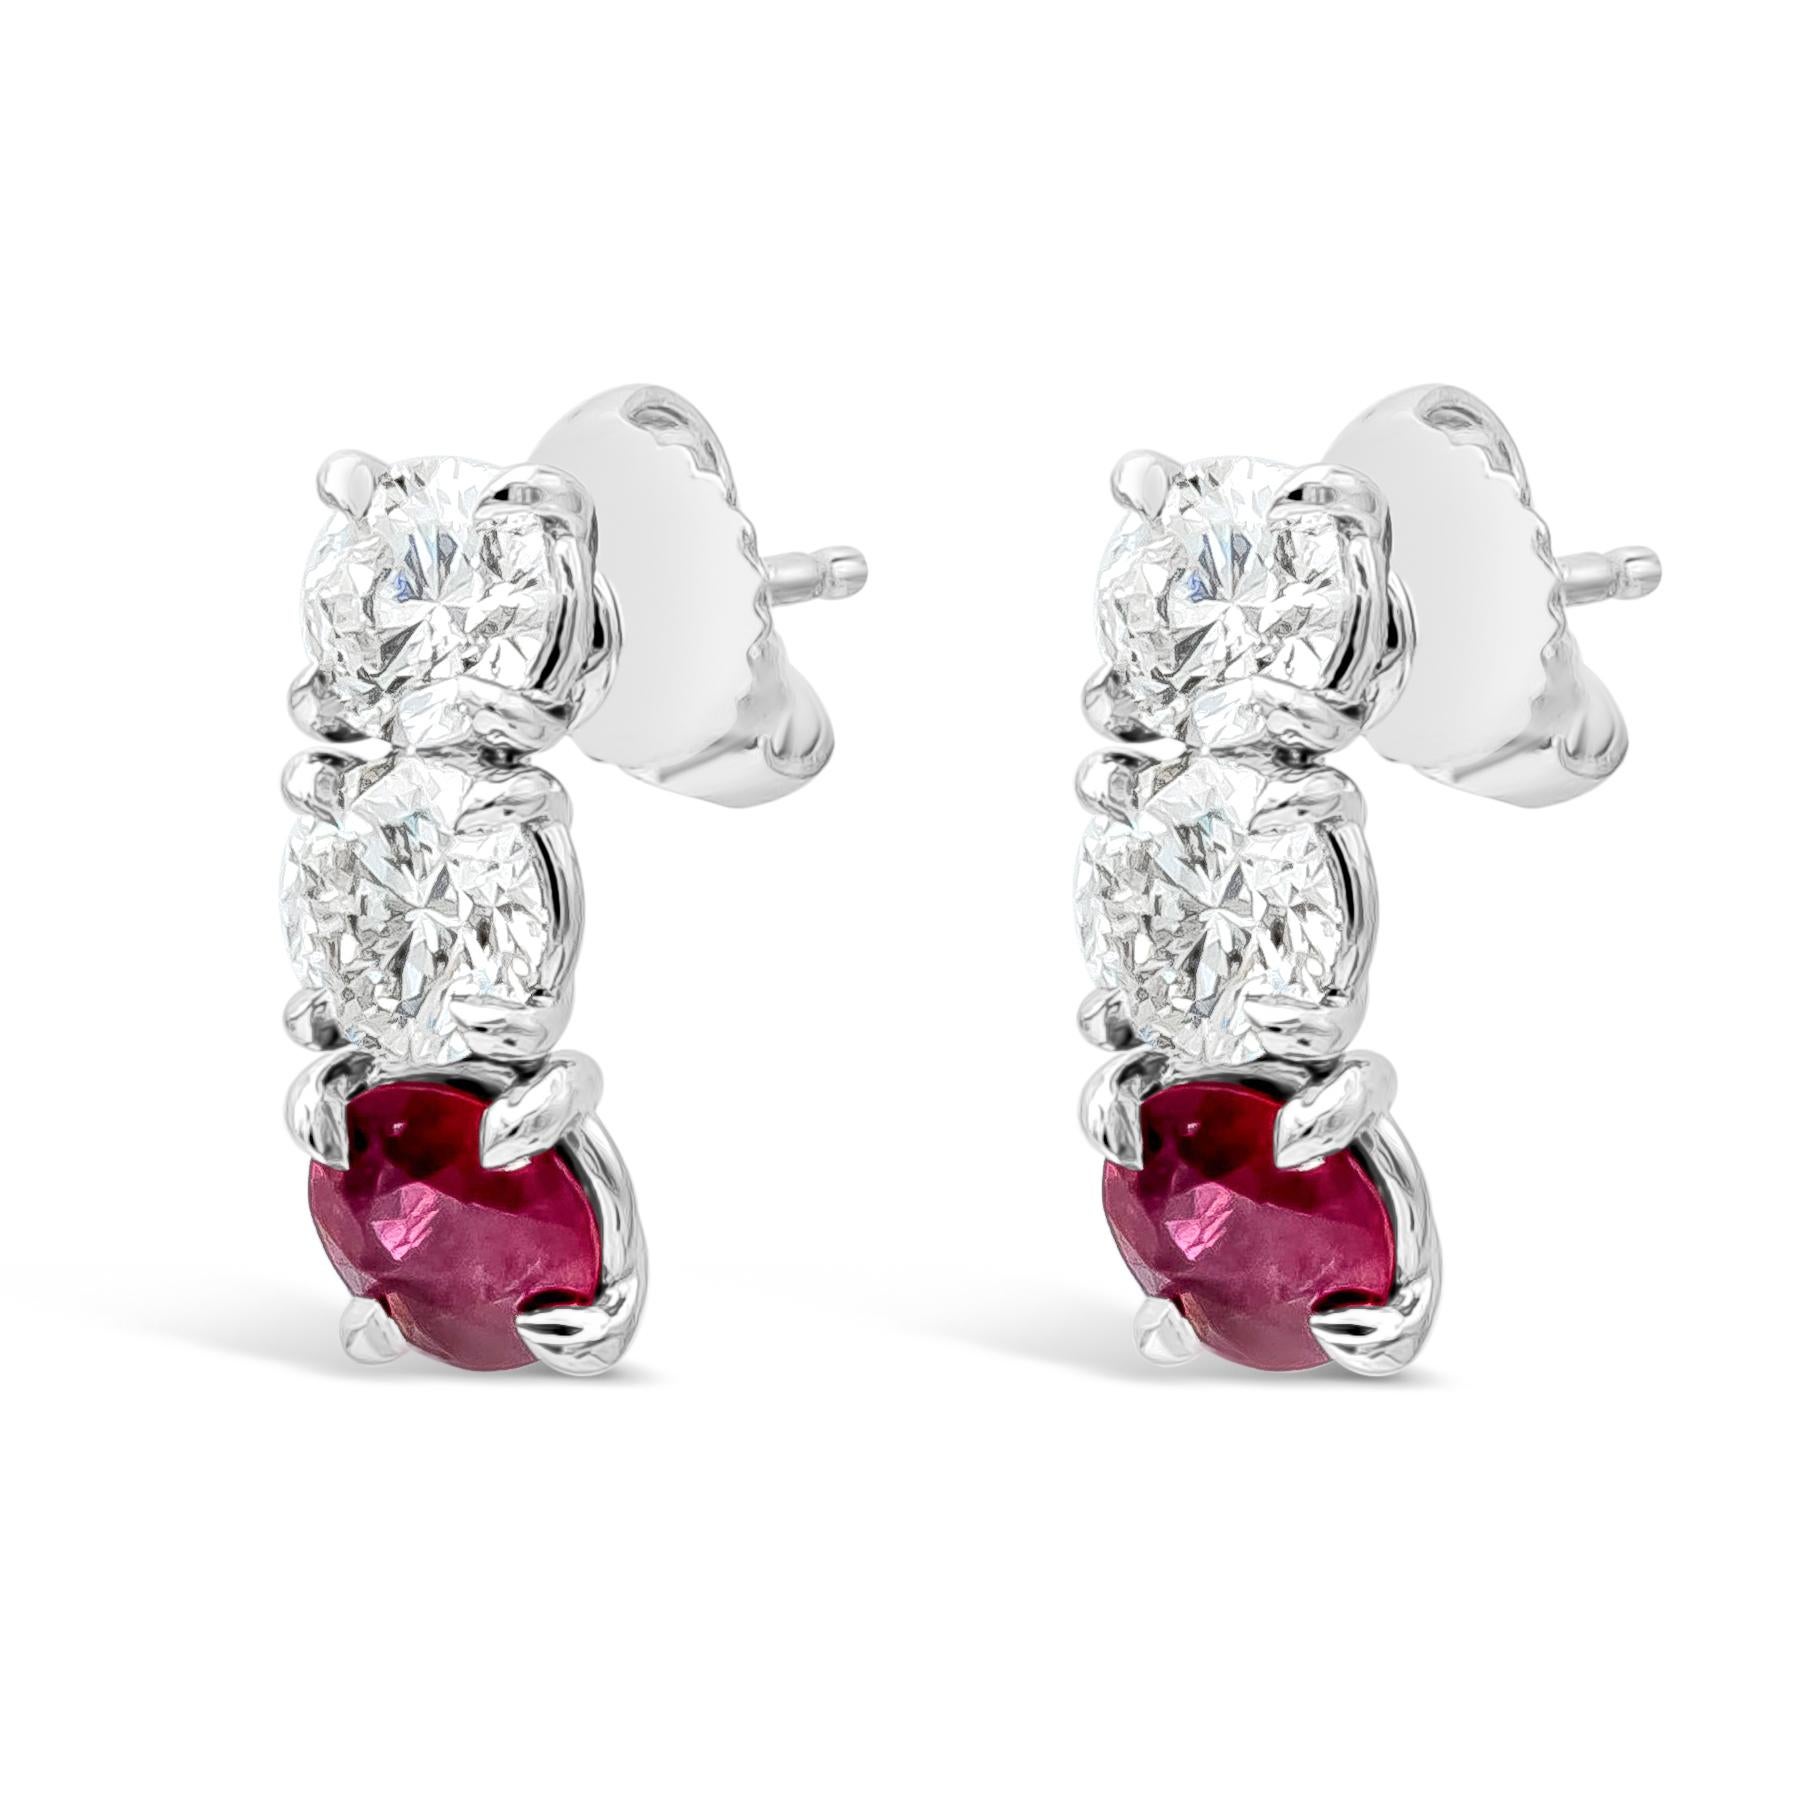 A simple and stylish piece of earrings, featuring Burmese rubies weighing 1.39 carats total and round white diamonds weighing 1.72 carats total with F color and SI clarity. Set in a classic 4 prong setting made of platinum. Has a matching necklace.